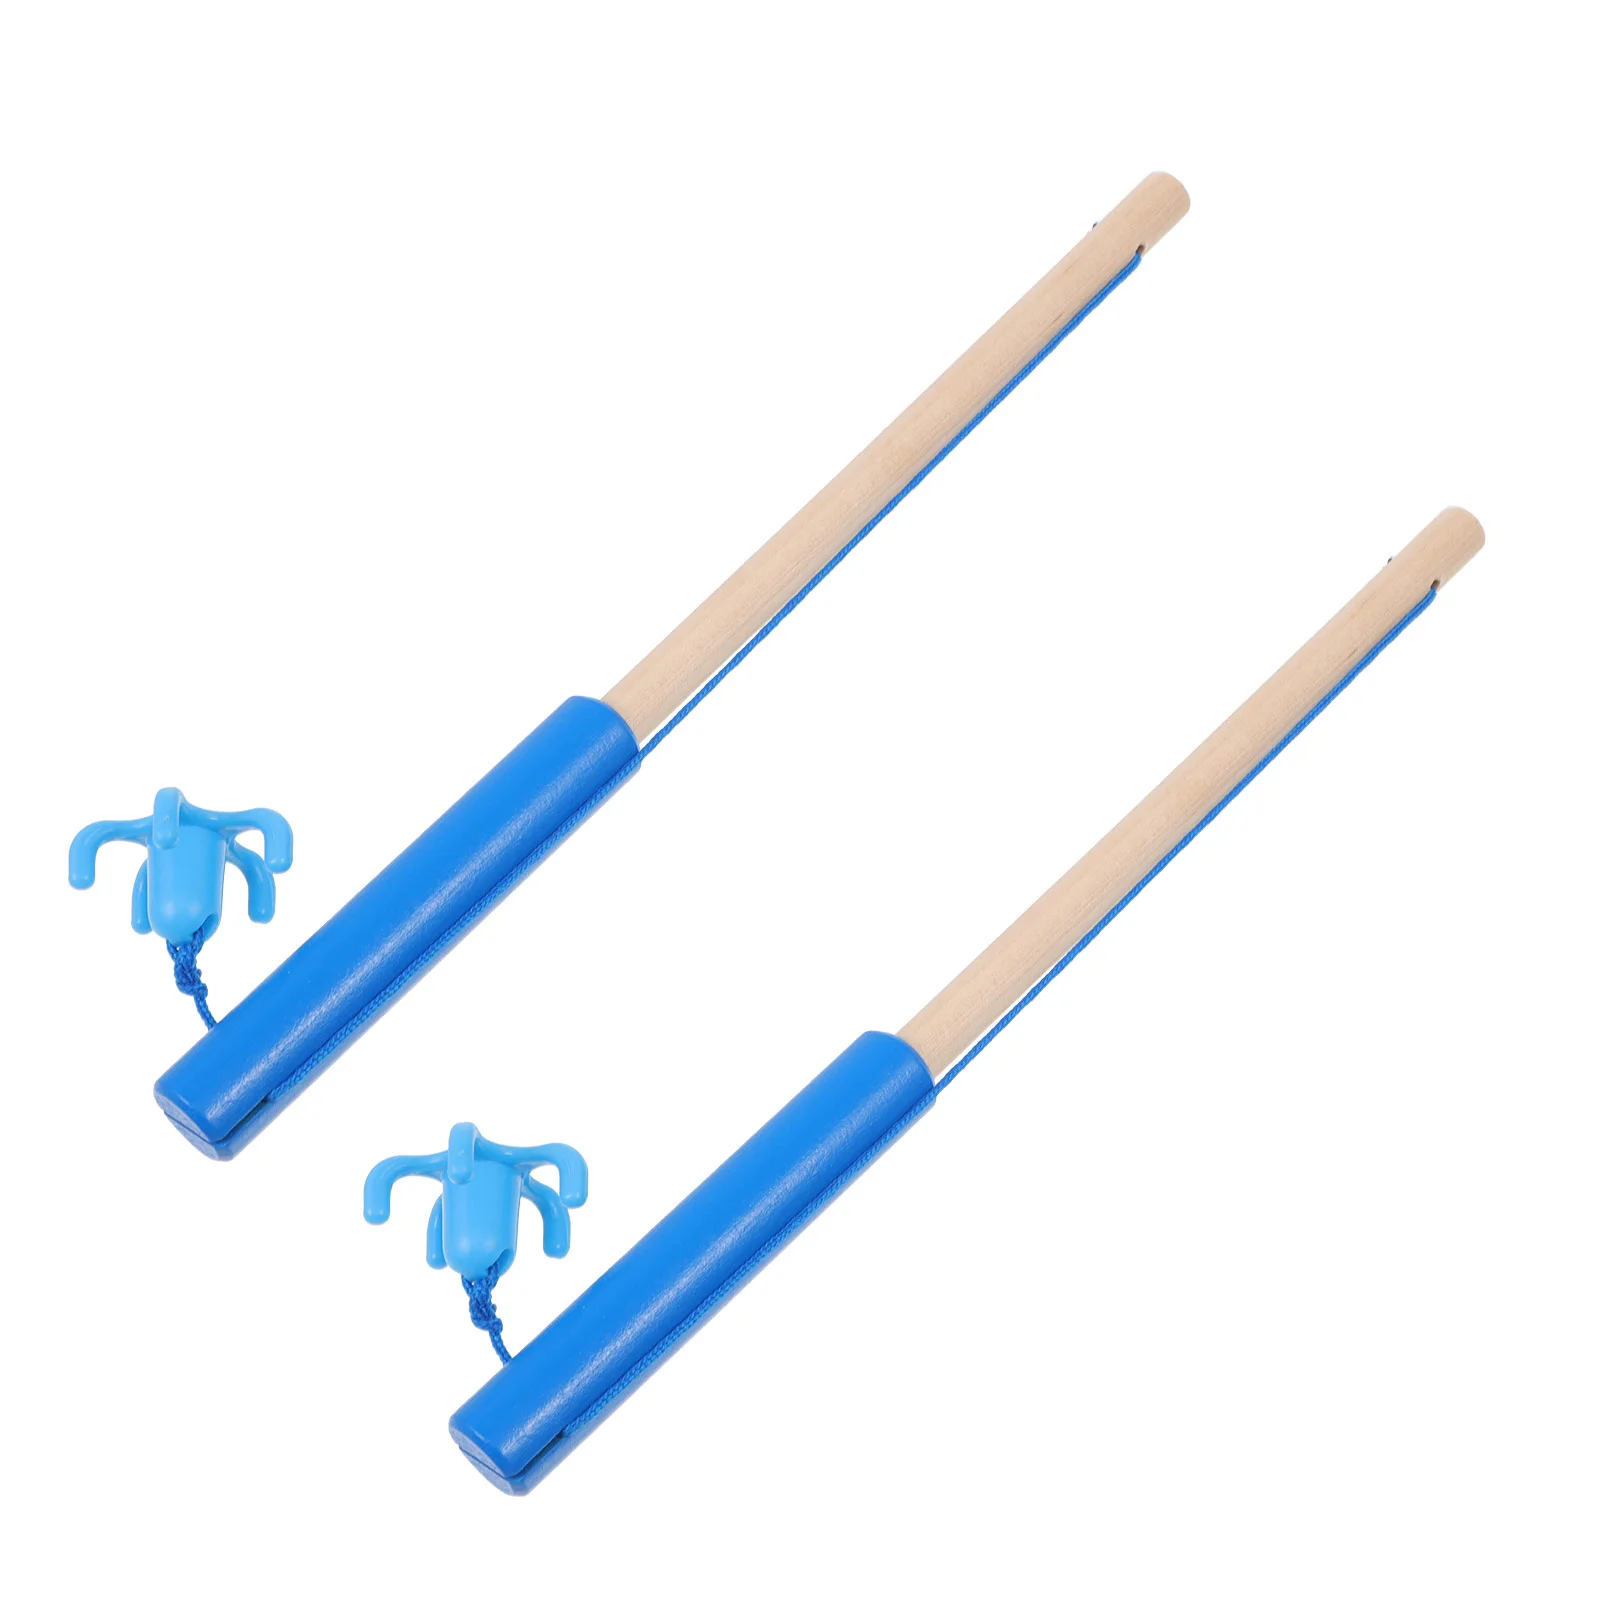 

2 Pcs Children's Fishing Rod Wooden Toy Magnetic Joysticks Pole Creative Kids Bath Toys Force Game Learning Educational